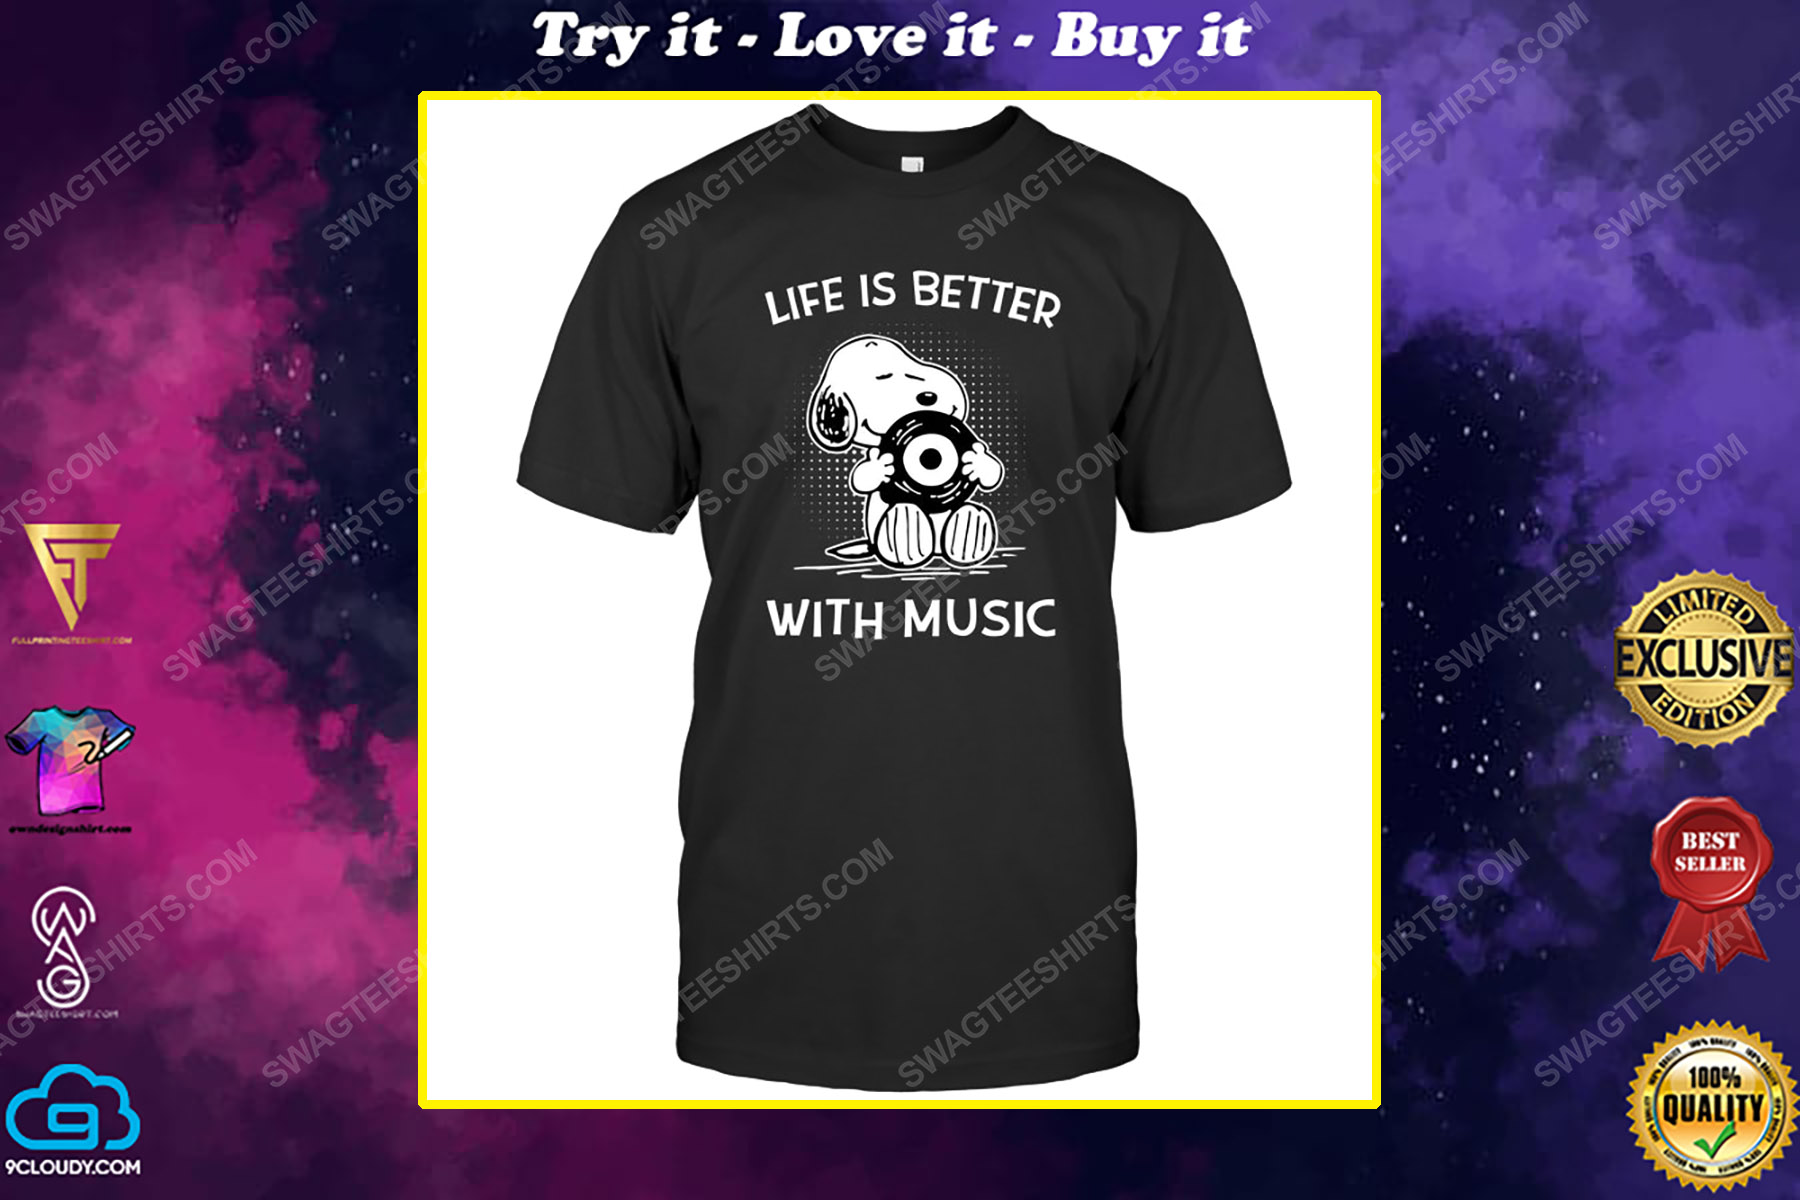 The peanuts snoopy life is better with music shirt